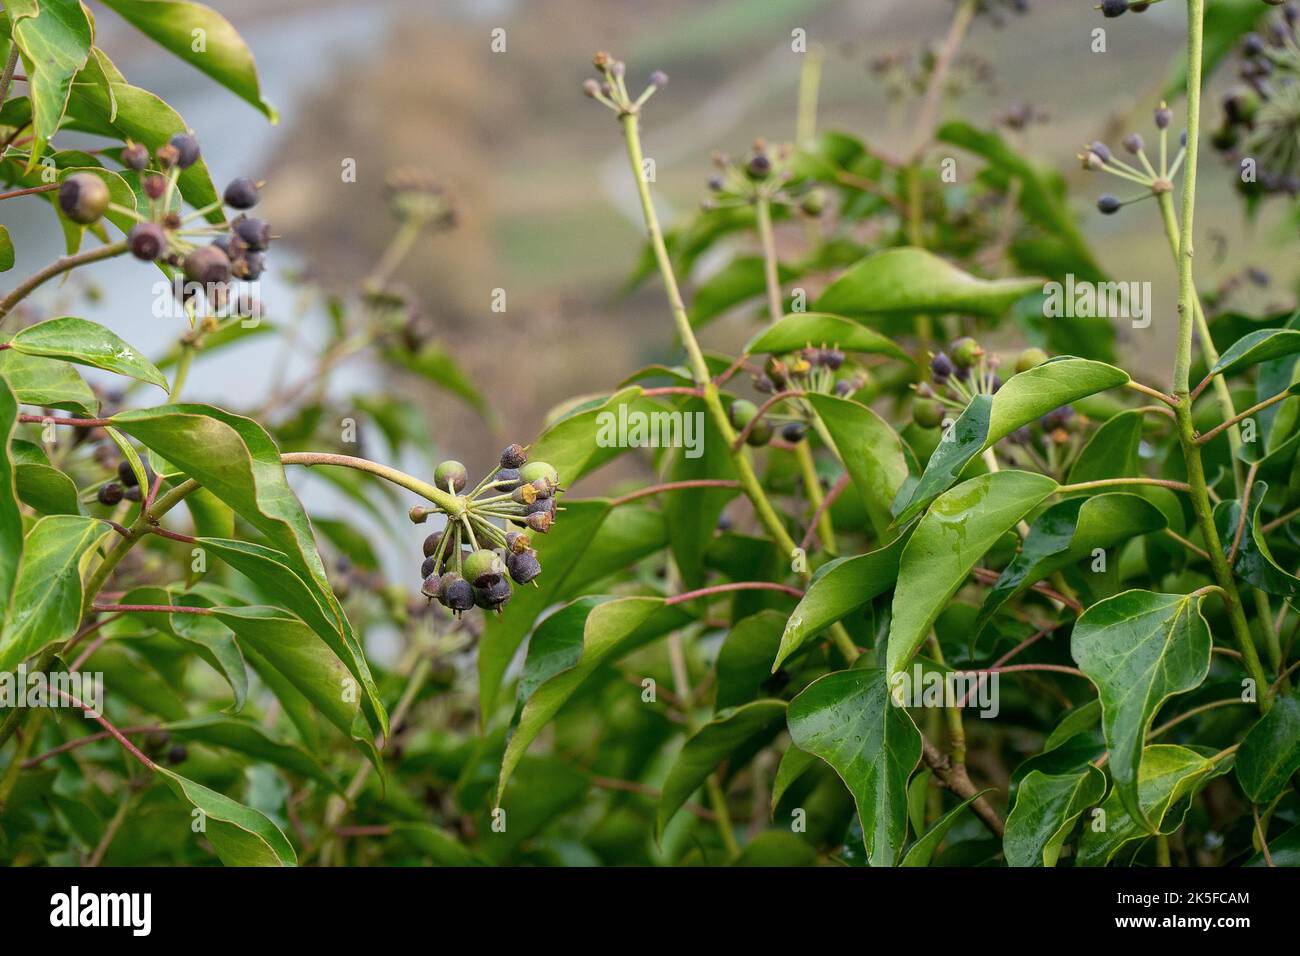 A close up shot of an Atlantic ivy plant Stock Photo